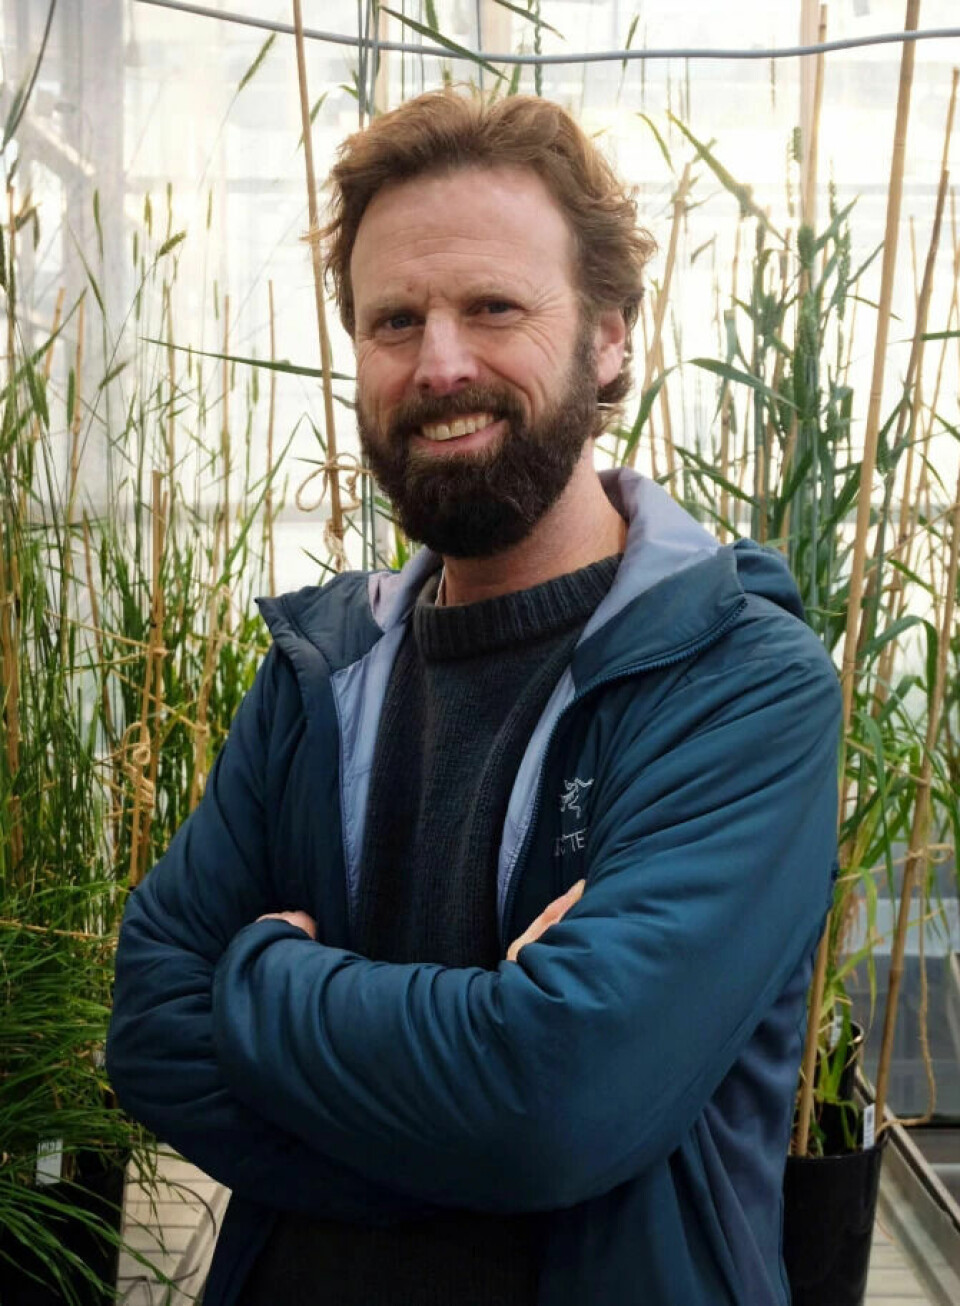 Ola Westengen researches food security at the Norwegian University of Life Sciences (NMBU).